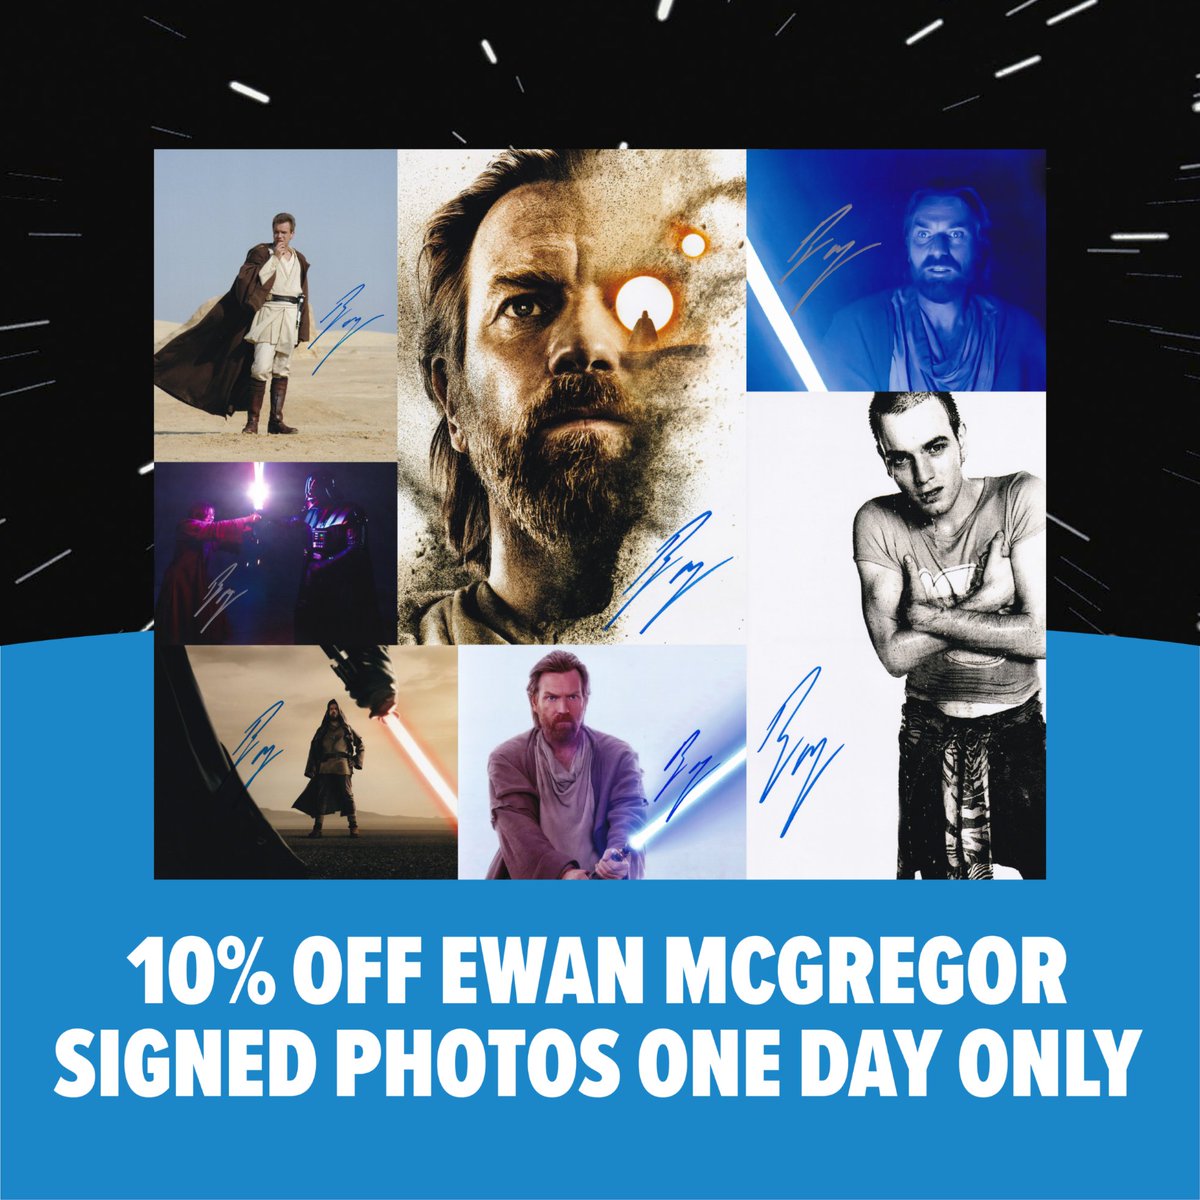 He has the high ground, but you have a discount. We're celebrating May the 4th by giving you 10% off Ewan McGregor autographs from Shop FAN EXPO. But hurry, the deal is only on for today. Discount will automatically be applied at checkout. spr.ly/6019jp8Hd